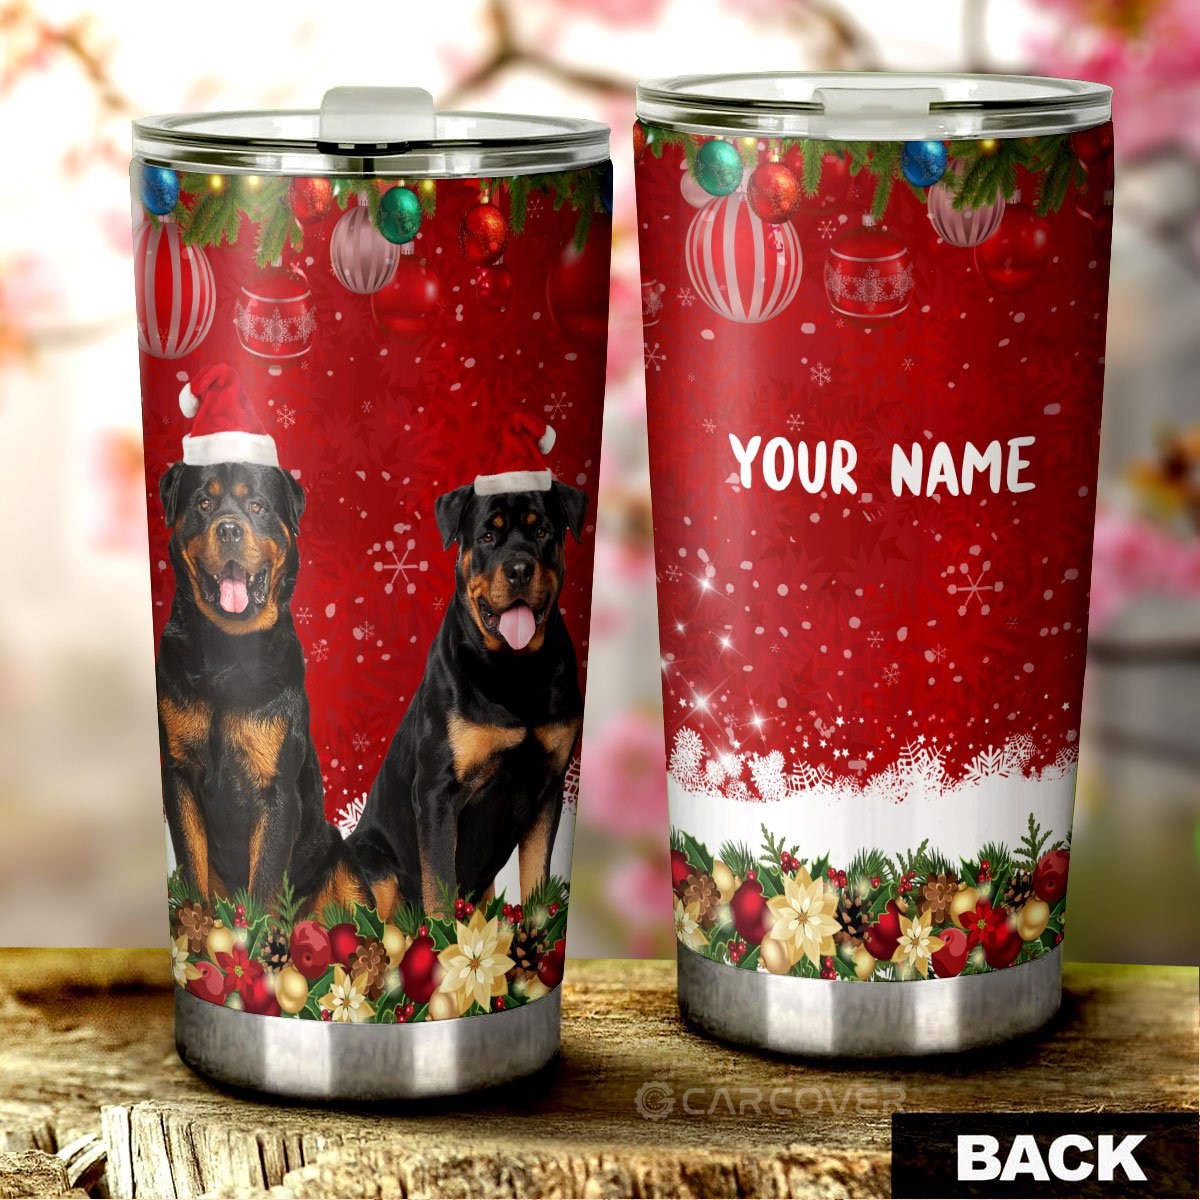 Rottweilers Tumbler Cup Custom Xmas Car Accessories - Gearcarcover - 1